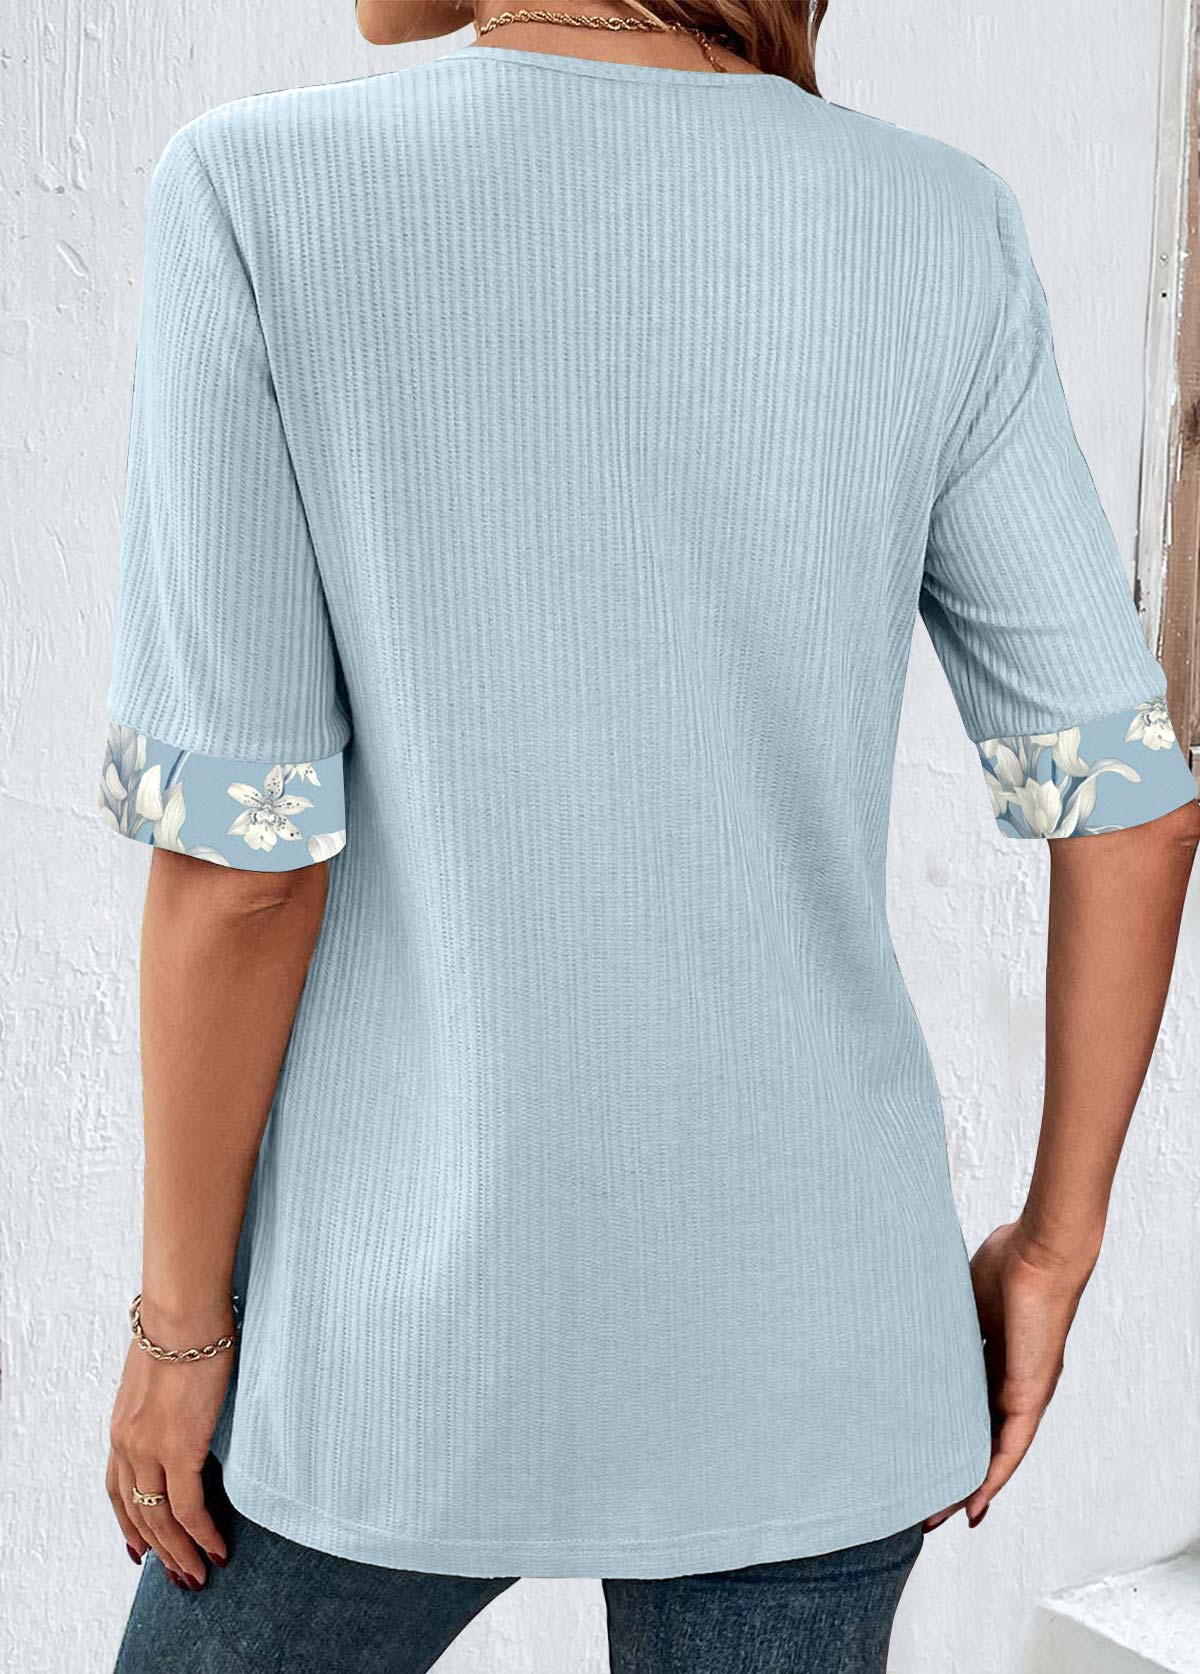 Floral Print Fake 2in1 Light Blue T Shirt